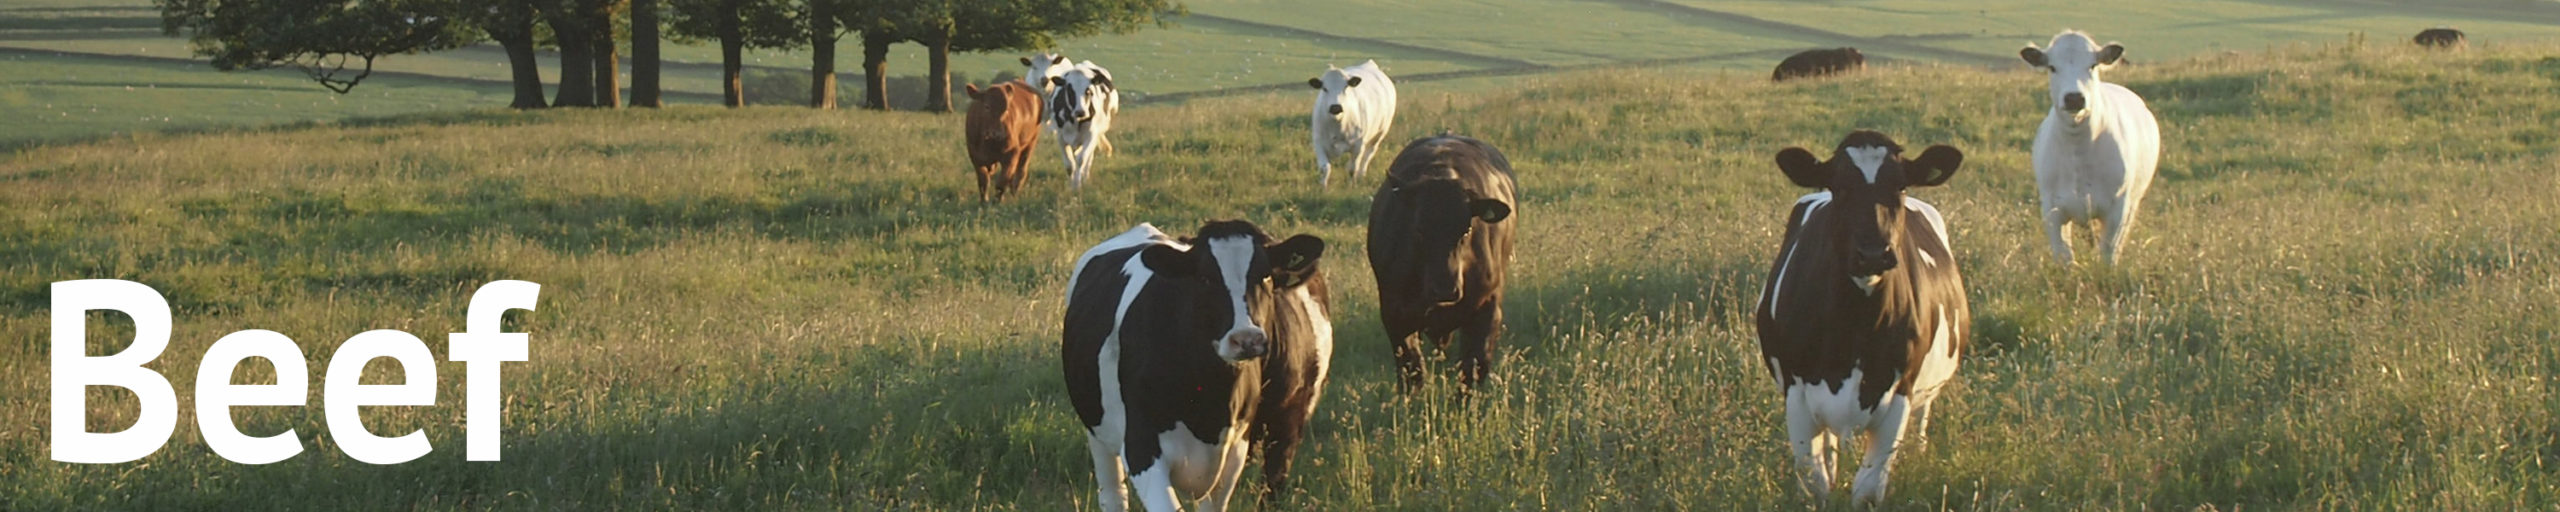 A group of cows stand in a field, staring at the cameraperson.